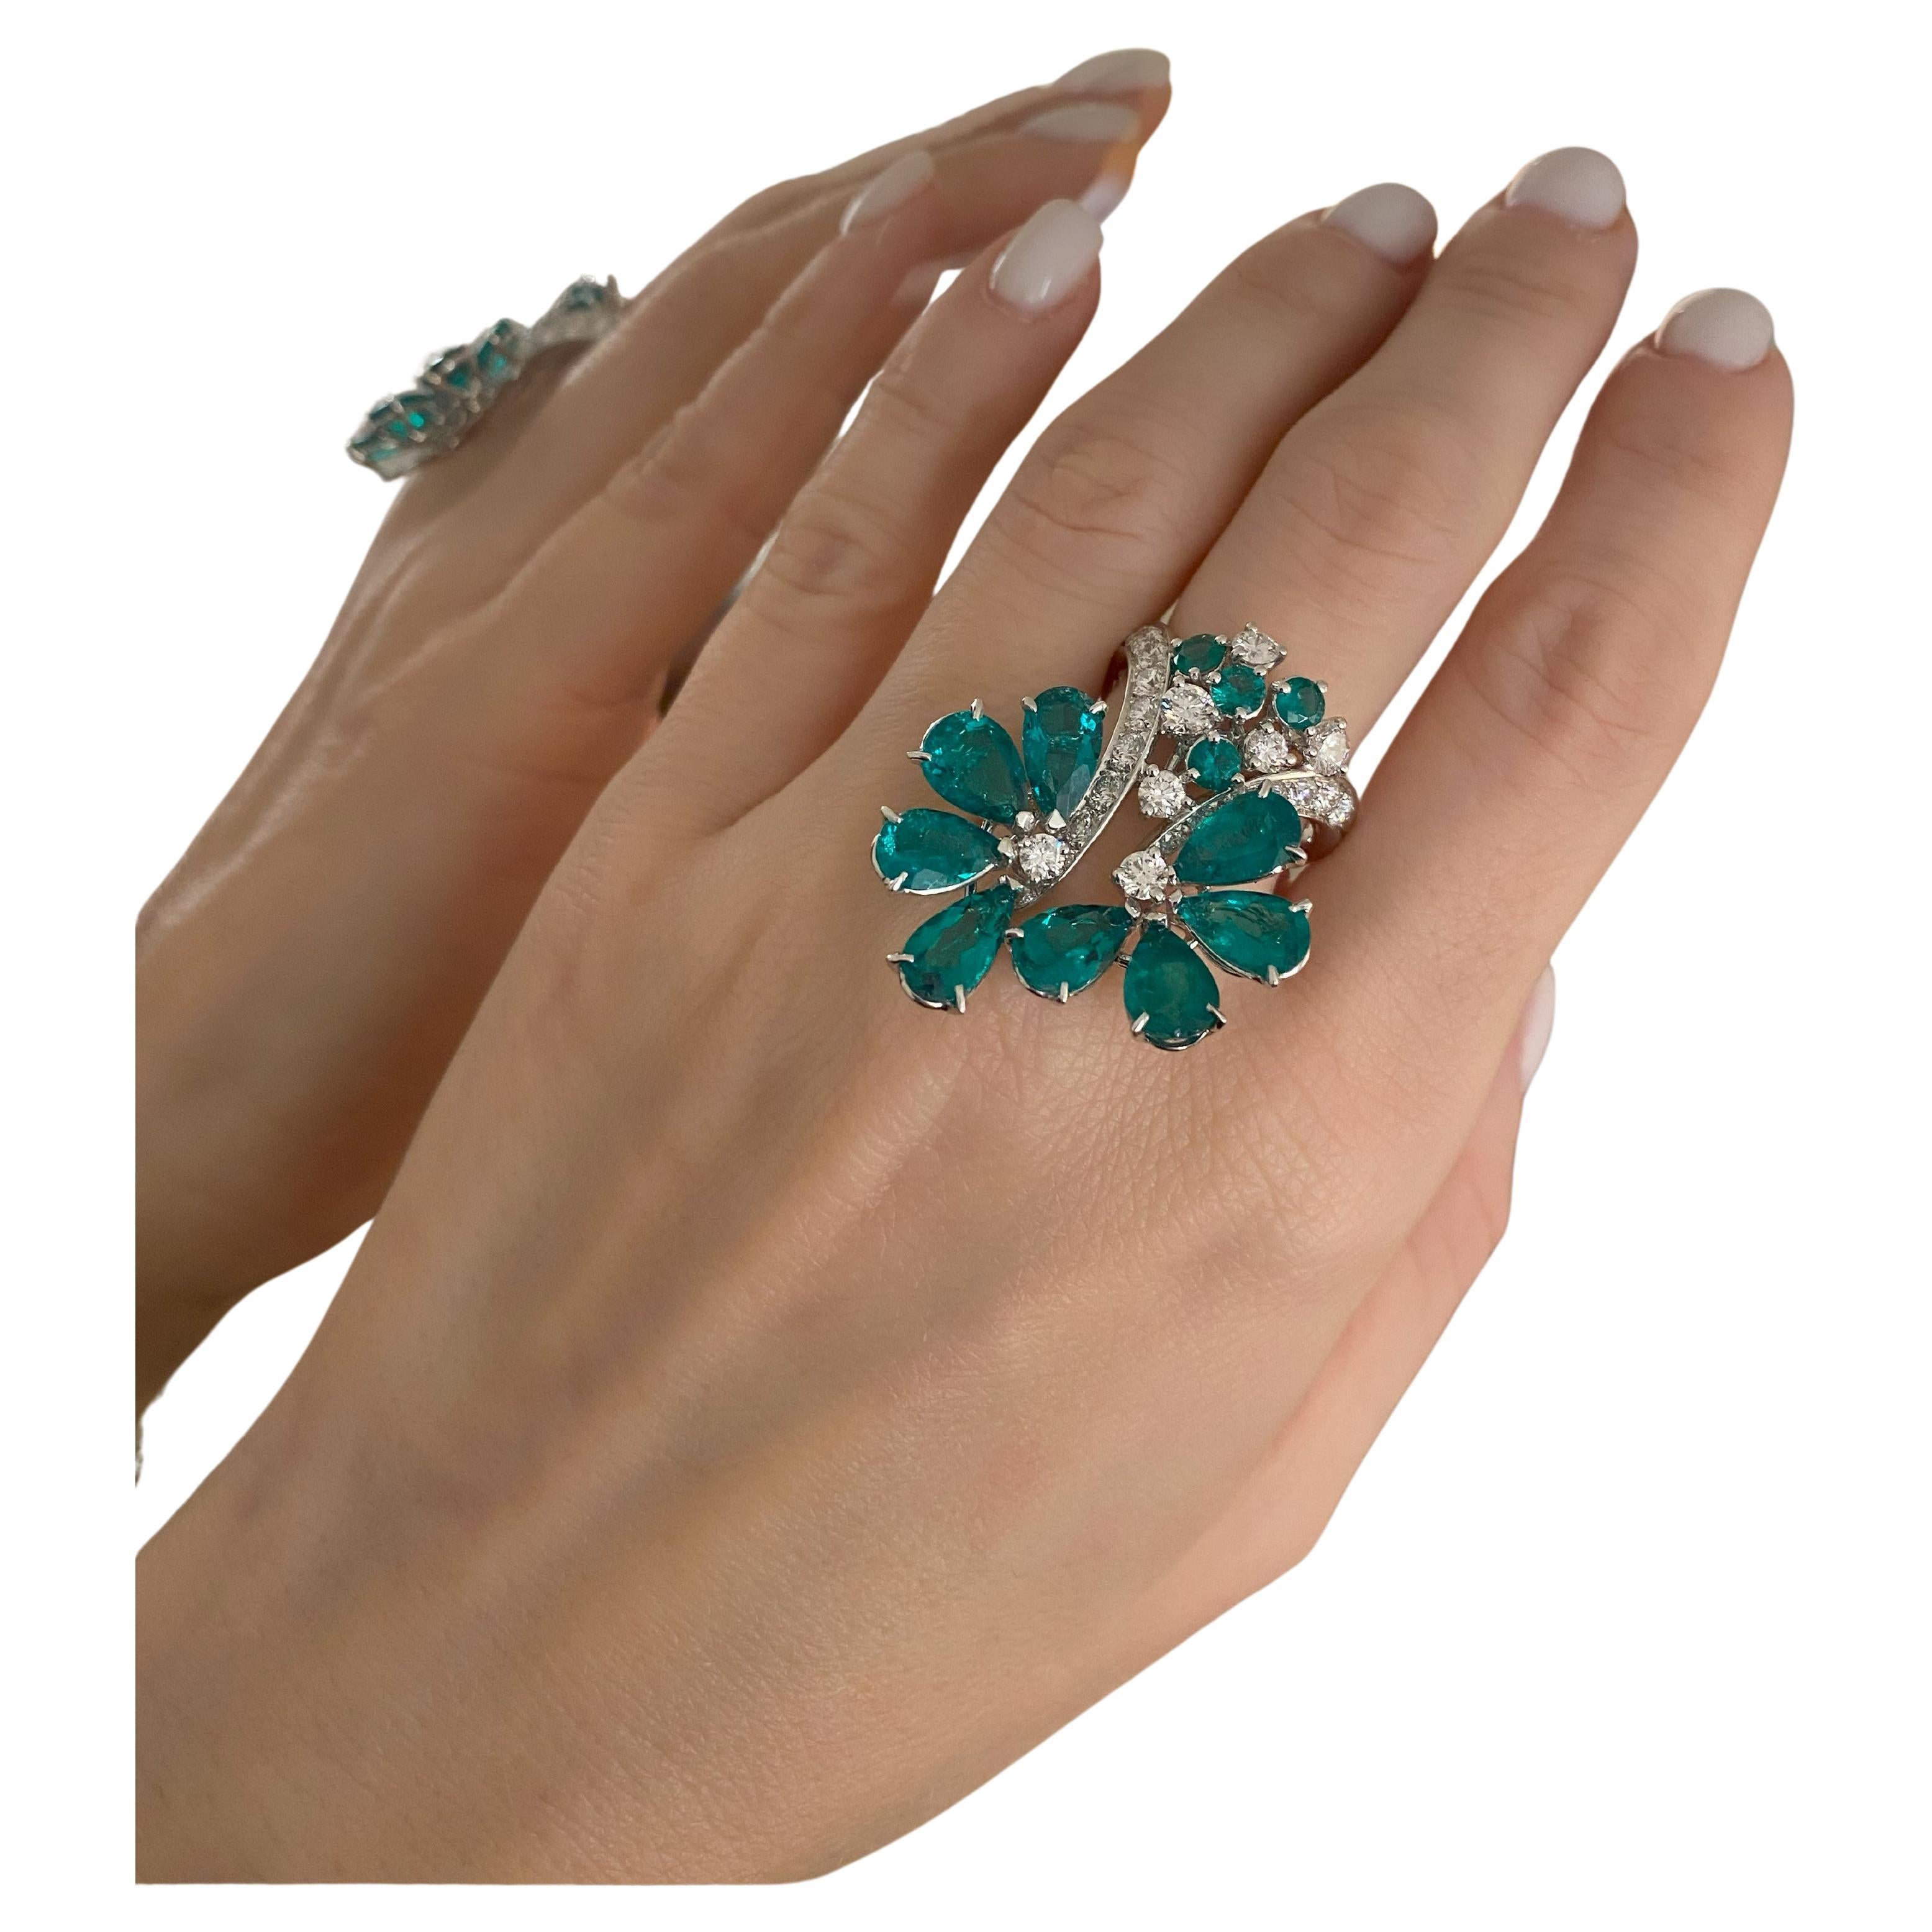 Introducing the captivating masterpiece from the renowned Italian jeweler Fulvio Maria SCAVIA, behold this enchanting 18Kt white gold ring adorned with an array of exquisite gemstones. At the heart of this stunning creation are the vibrant emeralds,